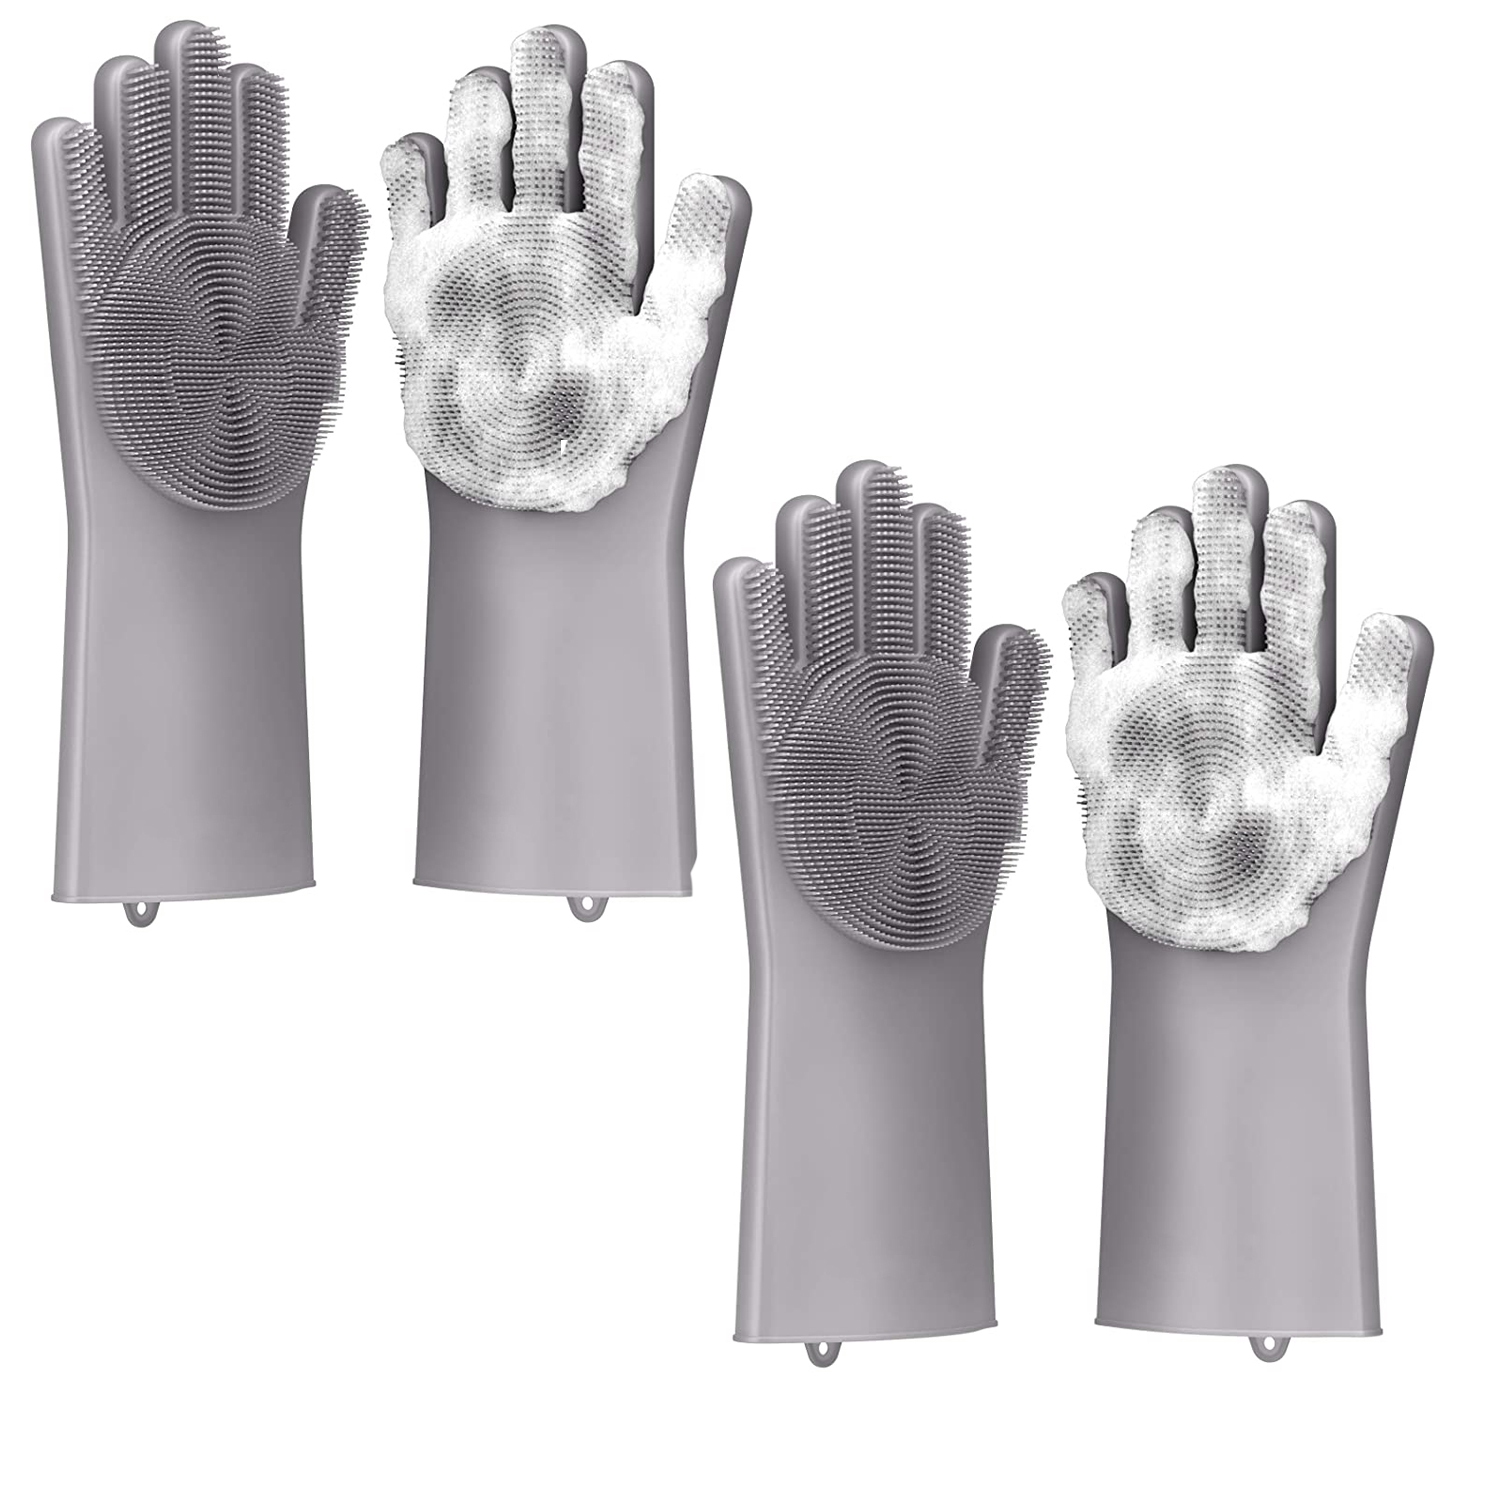 ISTAR Reusable Silicone Dishwashing Gloves, Pair of Rubber Scrubbing Gloves for Dishes, Wash Cleaning Gloves with Sponge Scrubbers for Washing Kitchen, Bathroom, Car & More (2 Pair , Grey)